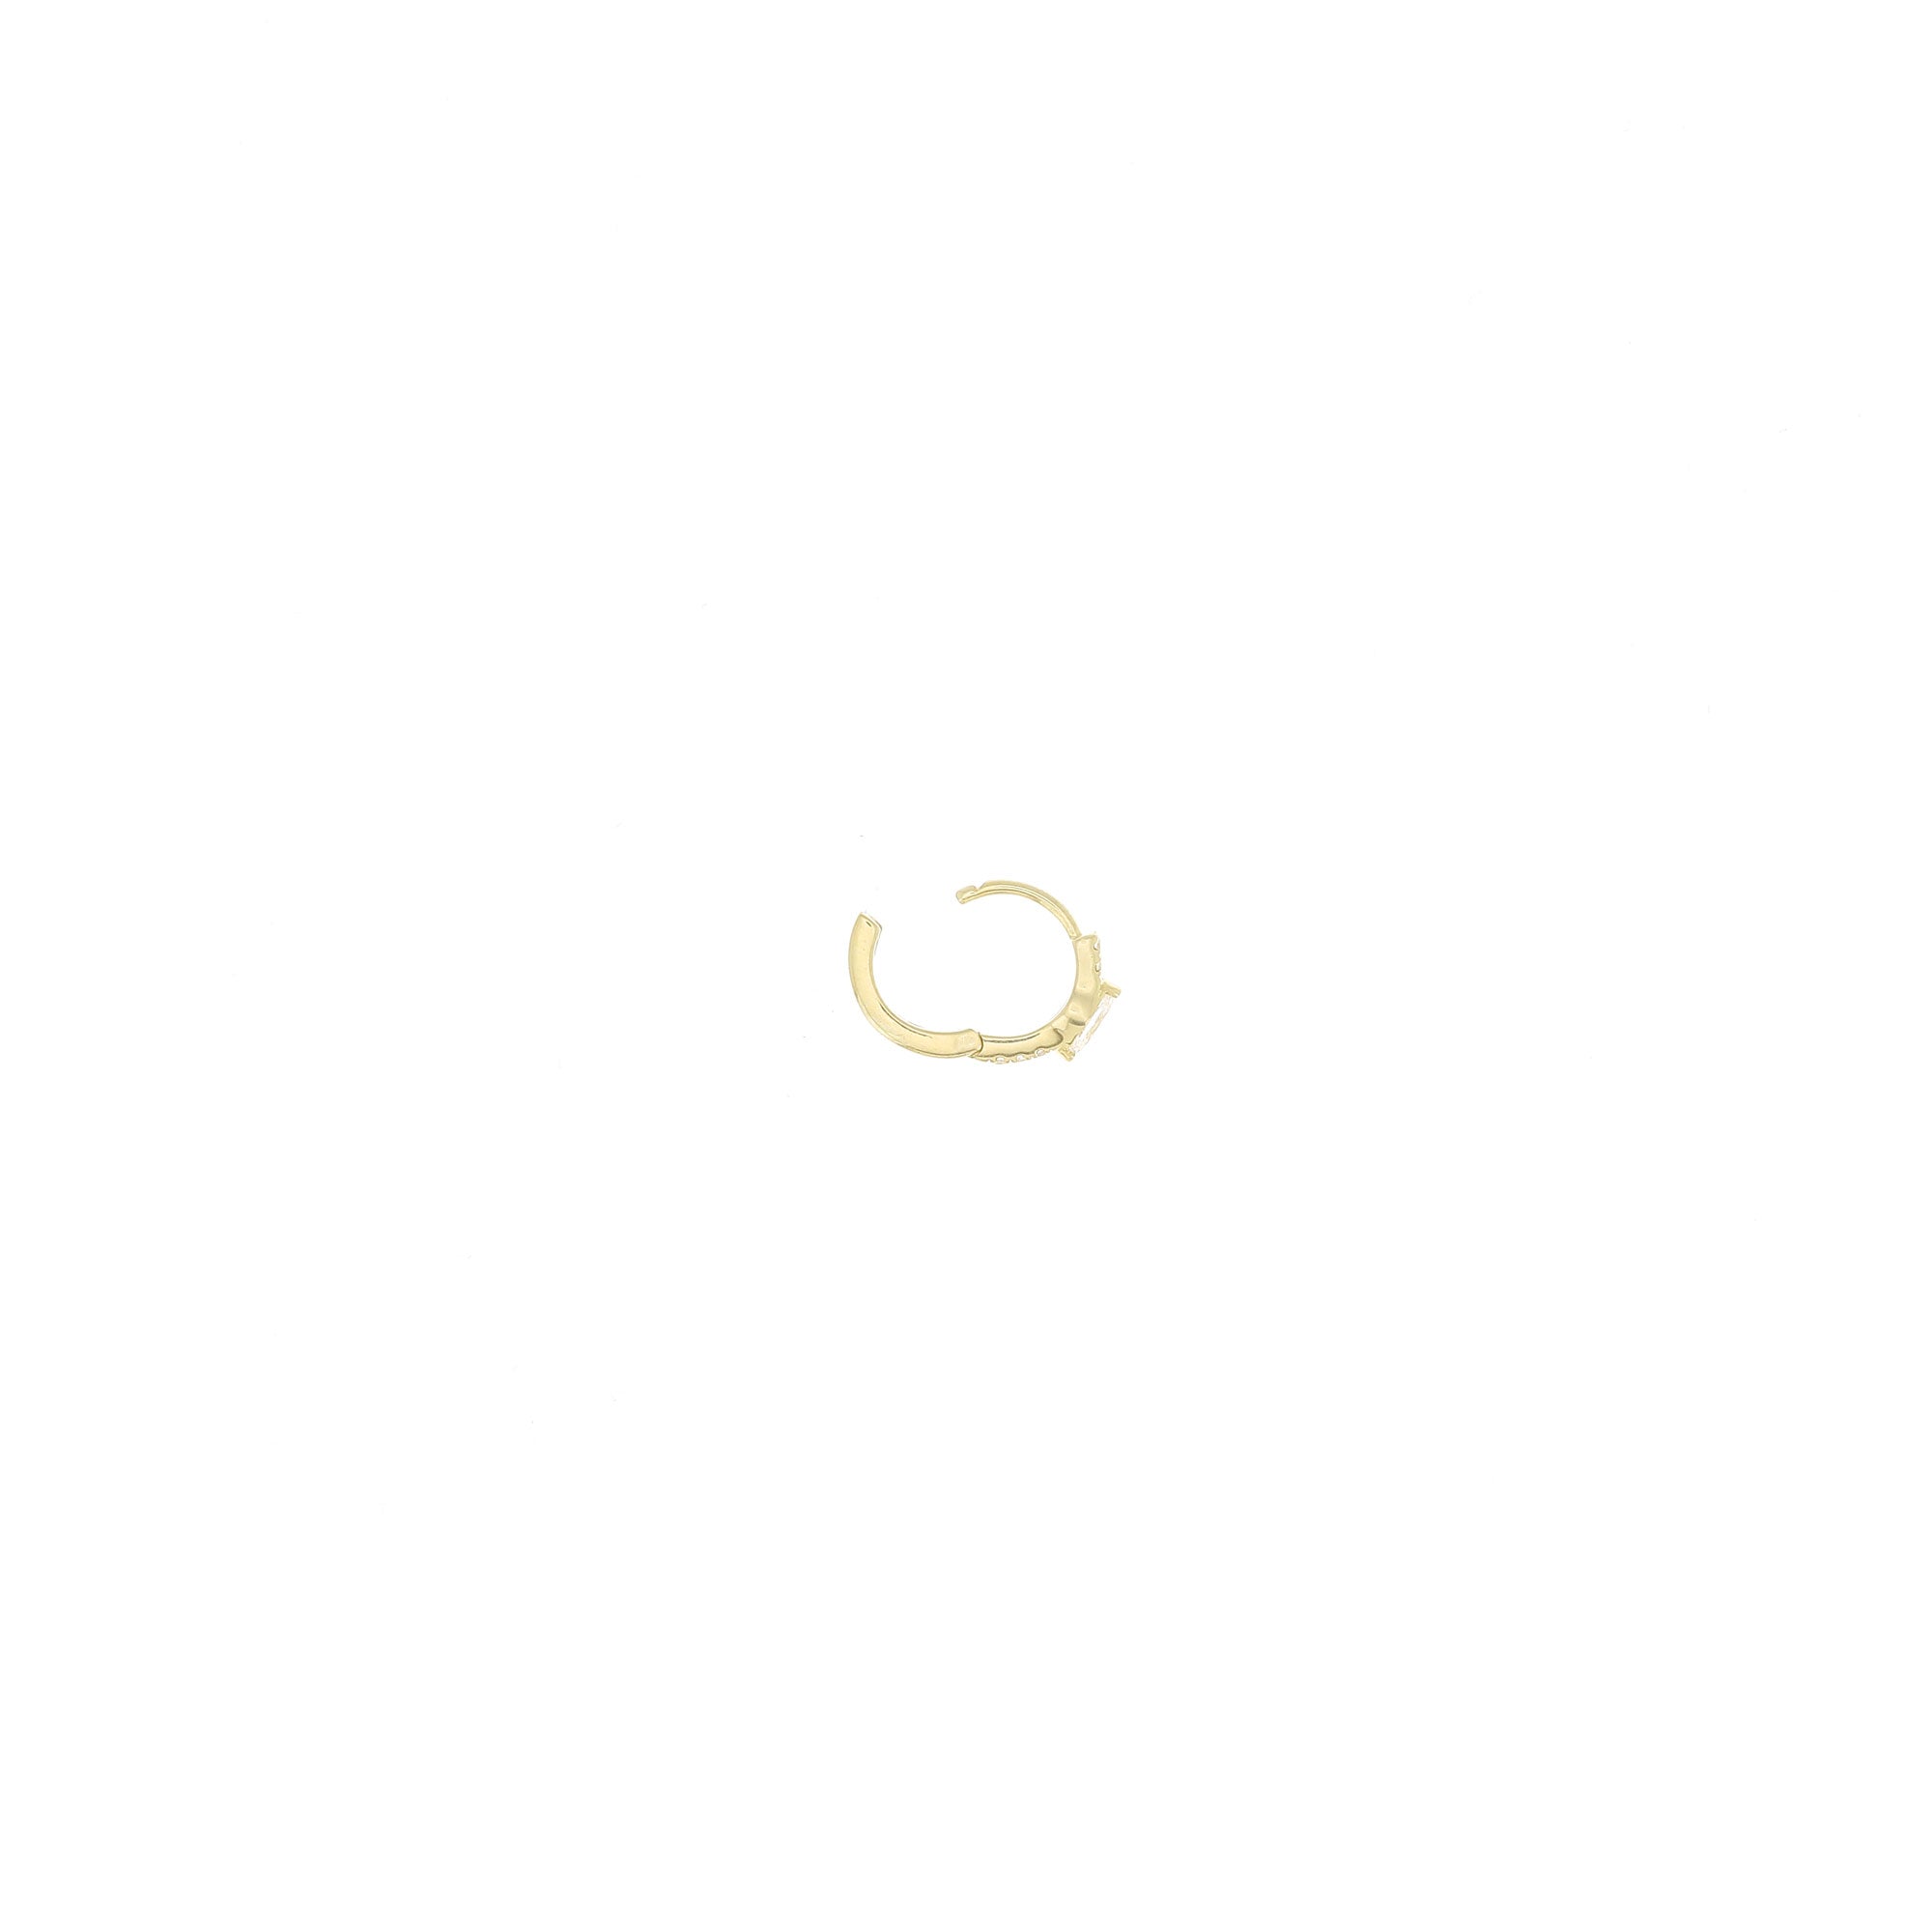 8mm Marquise 4.5mm Half Paved Yellow Gold Hoop